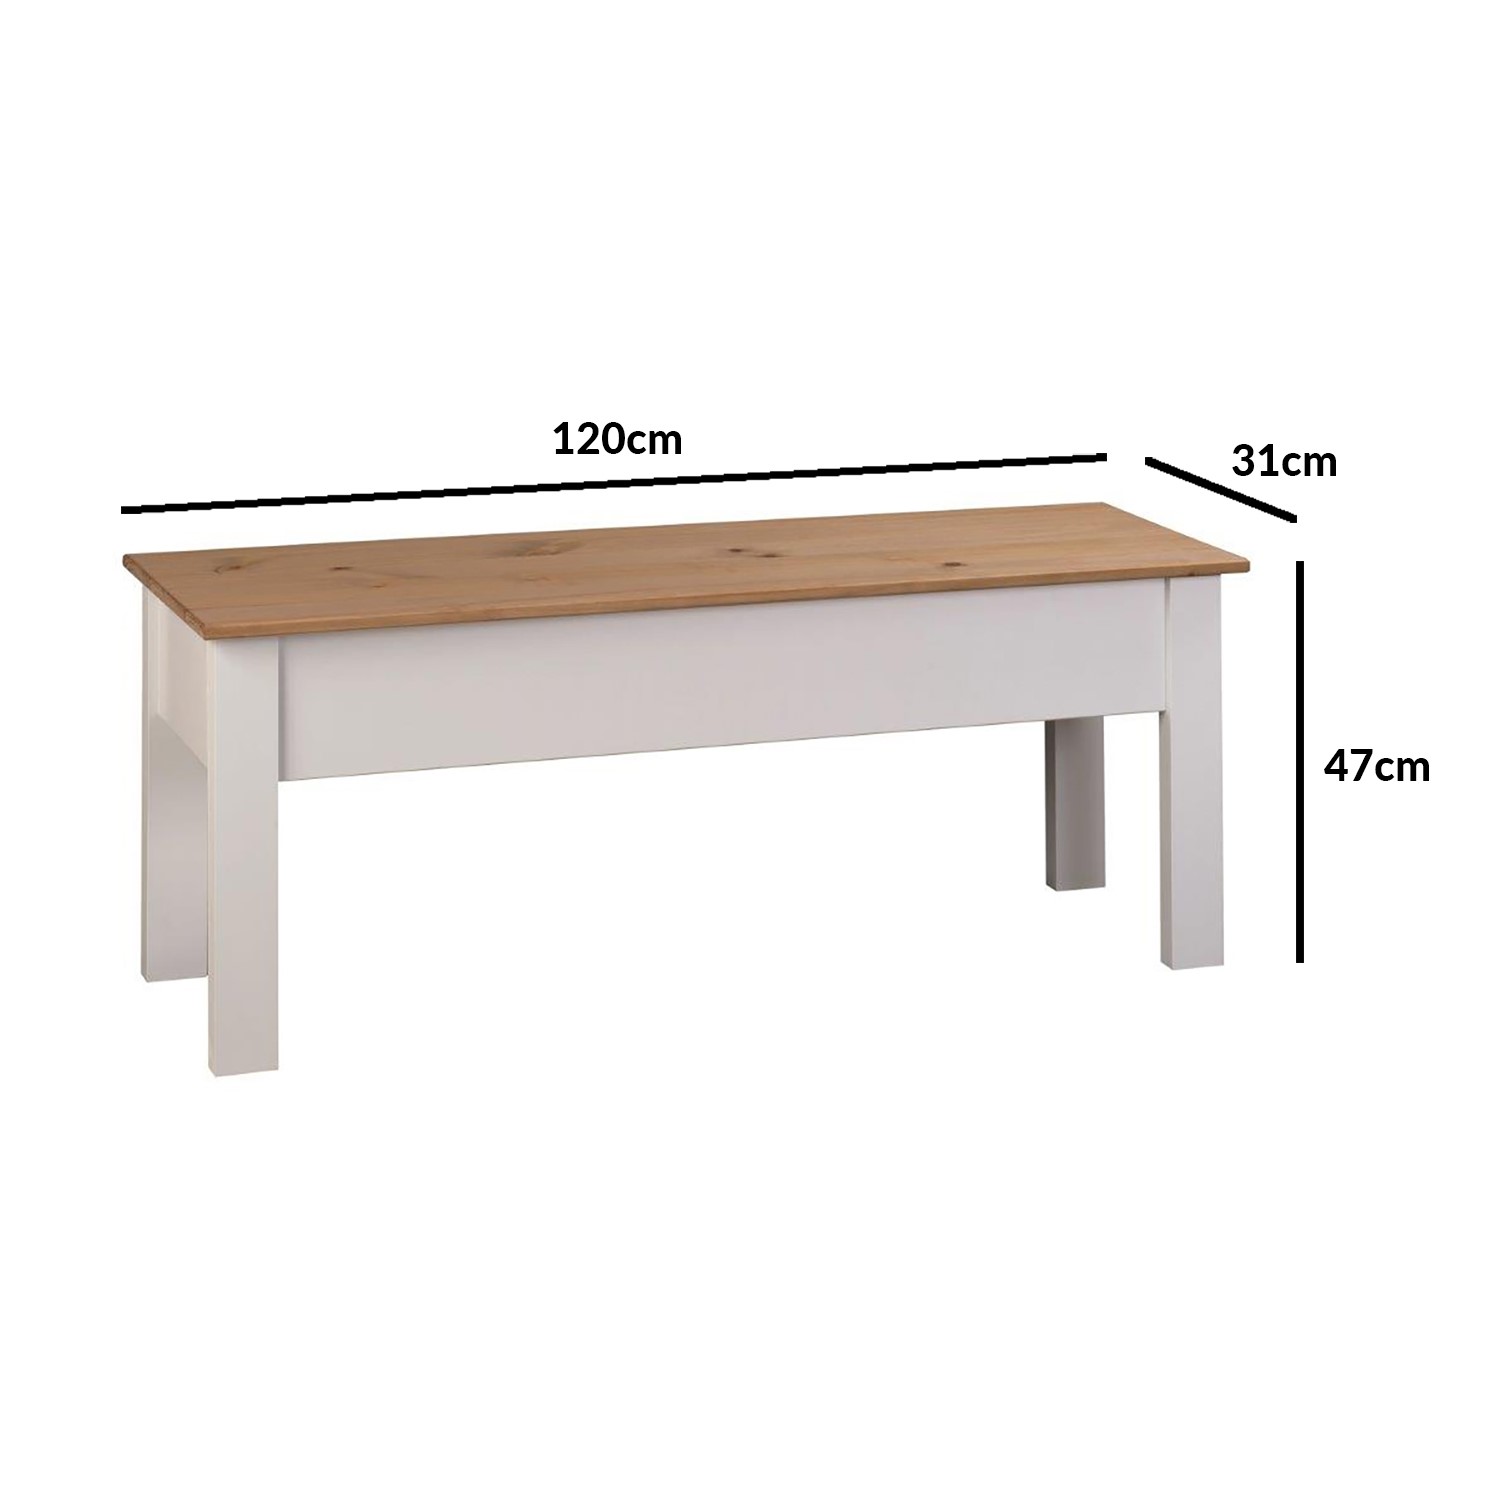 Emerson Grey Pine Dining Table With 2, Dining Room Bench Dimensions